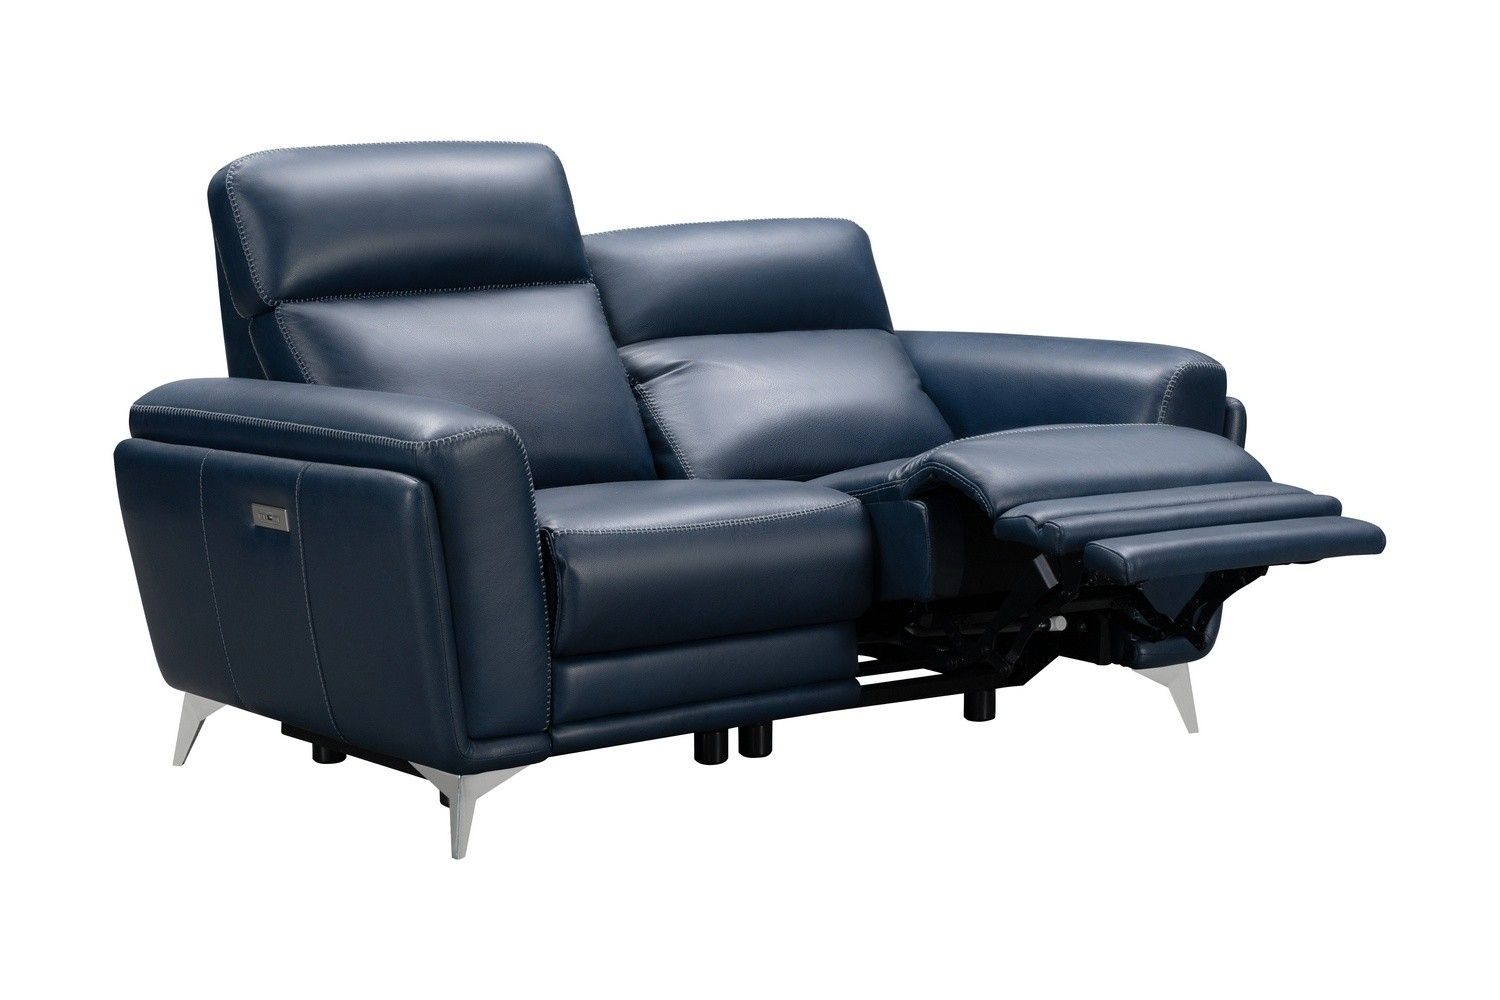 Barcalounger Cameron Power Reclining Loveseat With Power Inside Marco Leather Power Reclining Sofas (View 8 of 15)